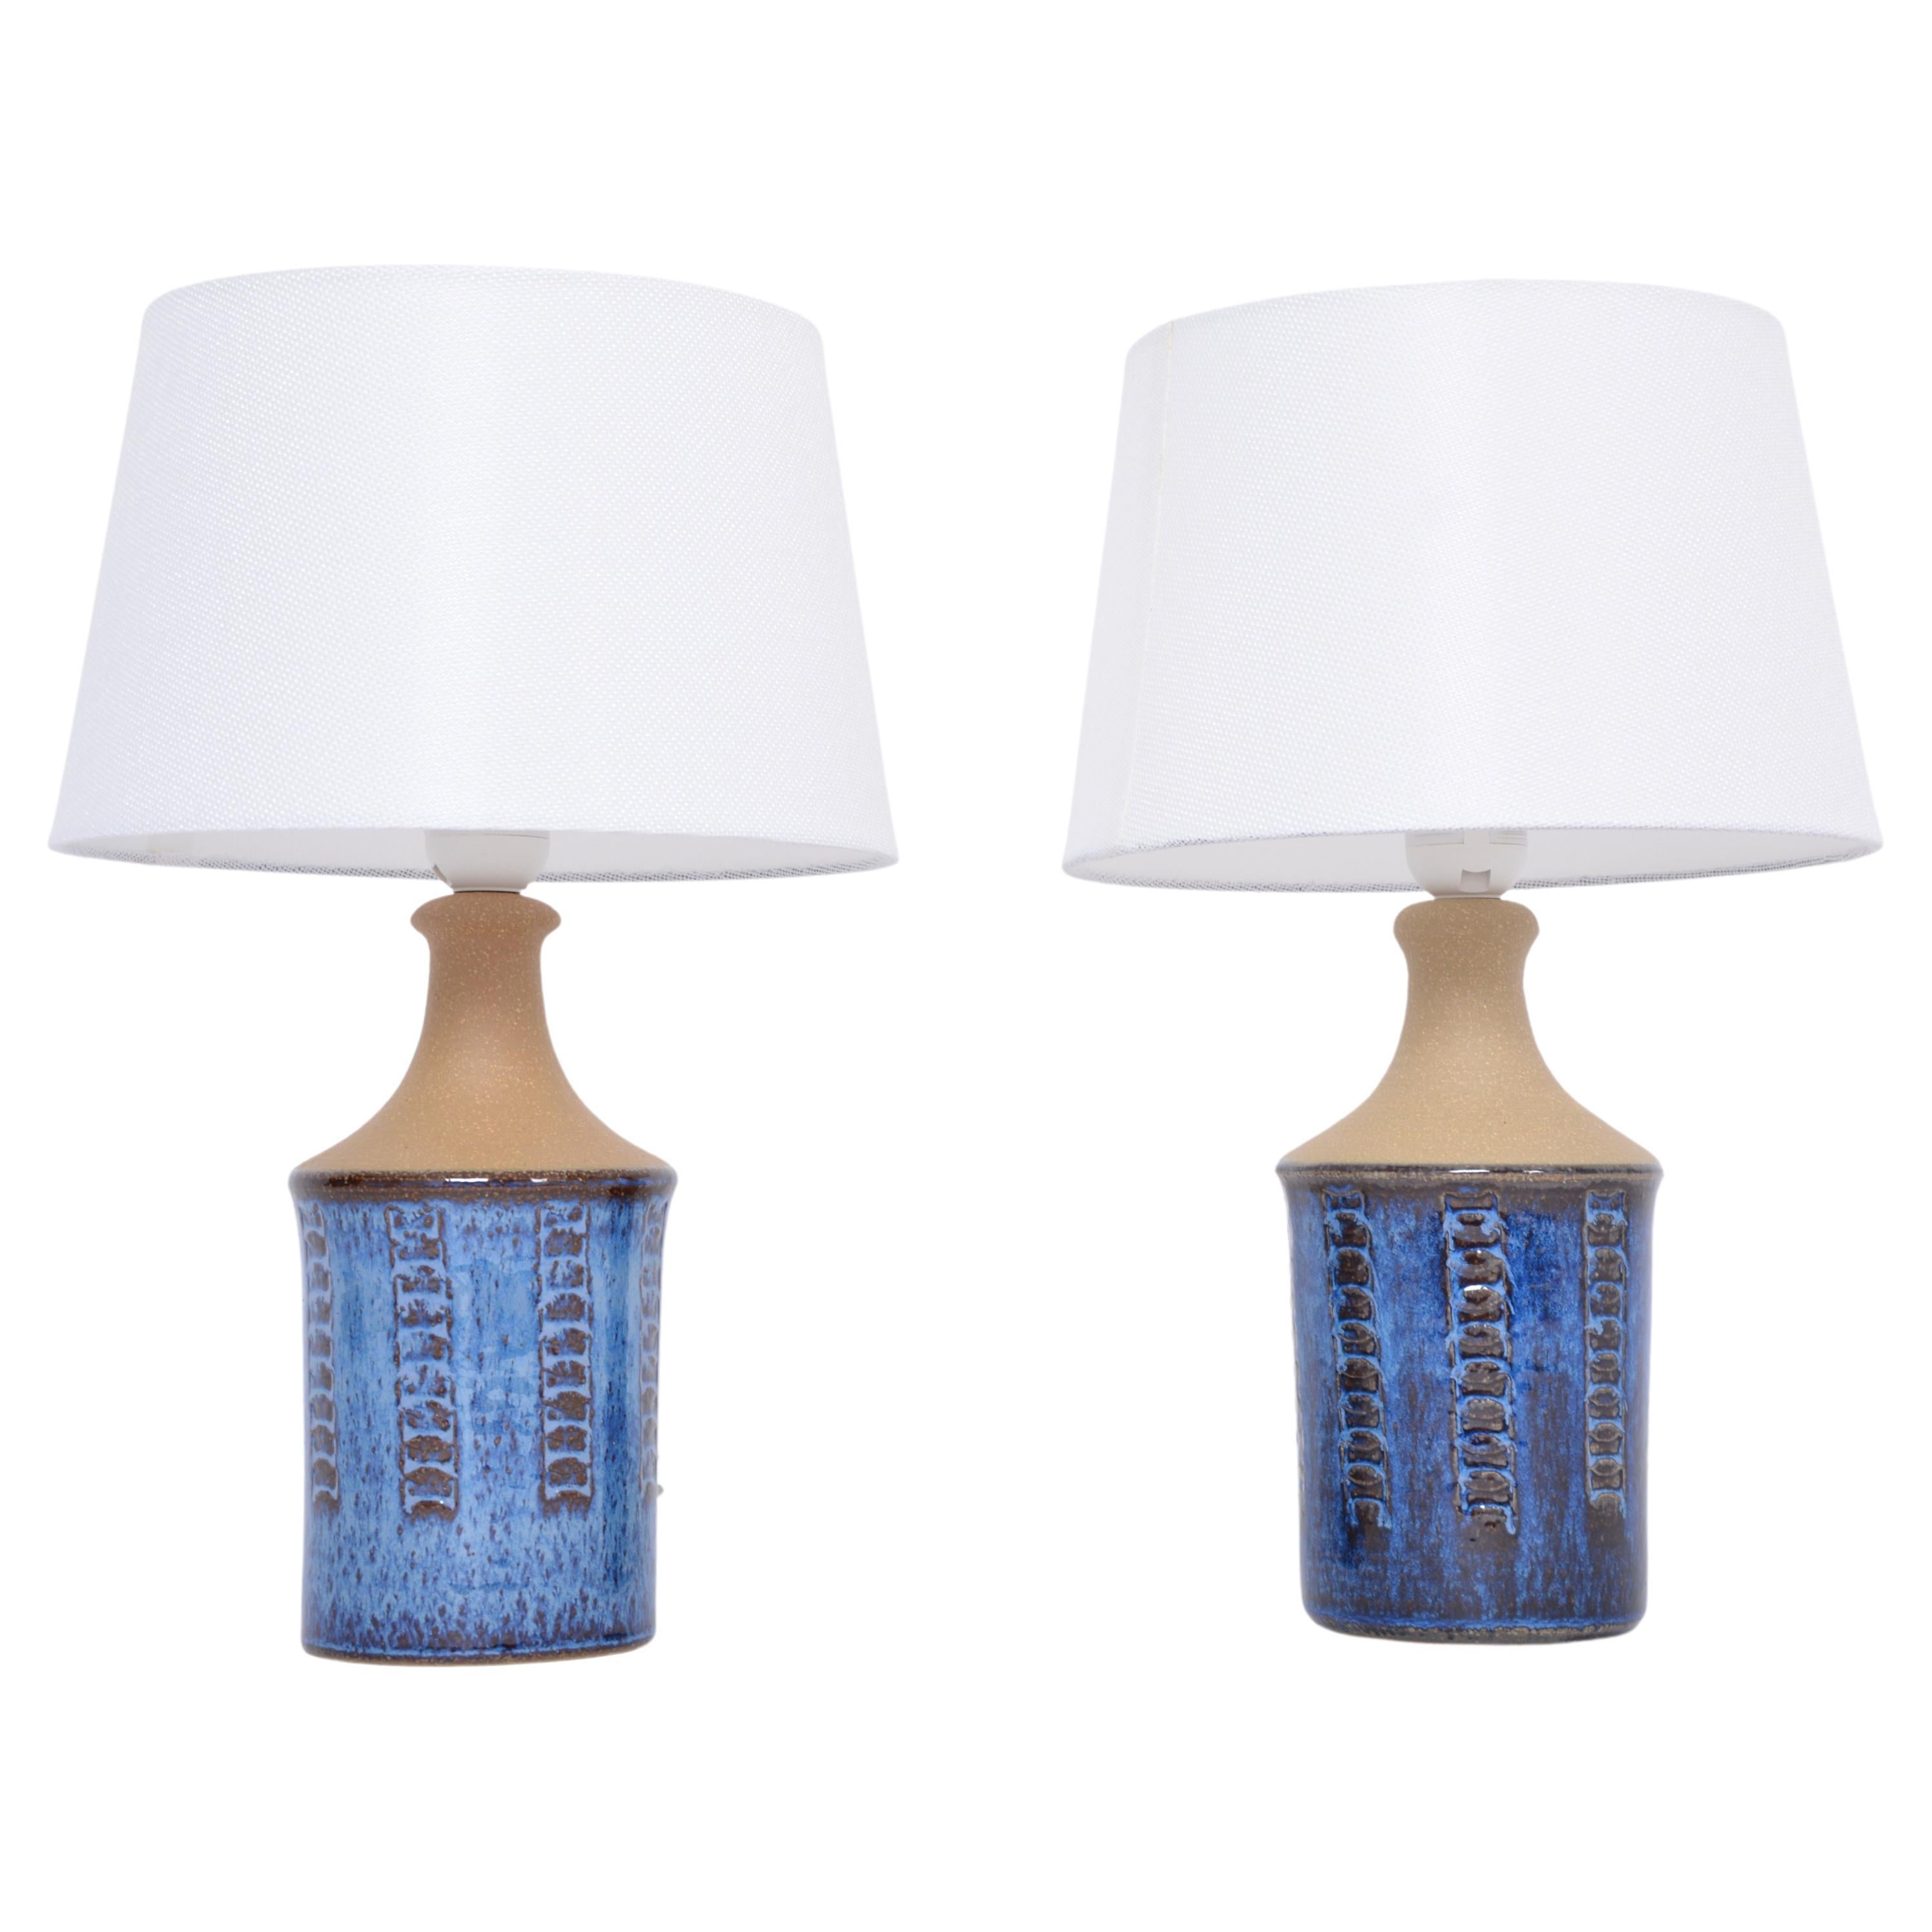 Pair of Smalll Blue Mid-Century Modern Table Lamps by Maria Philippi for Soholm For Sale